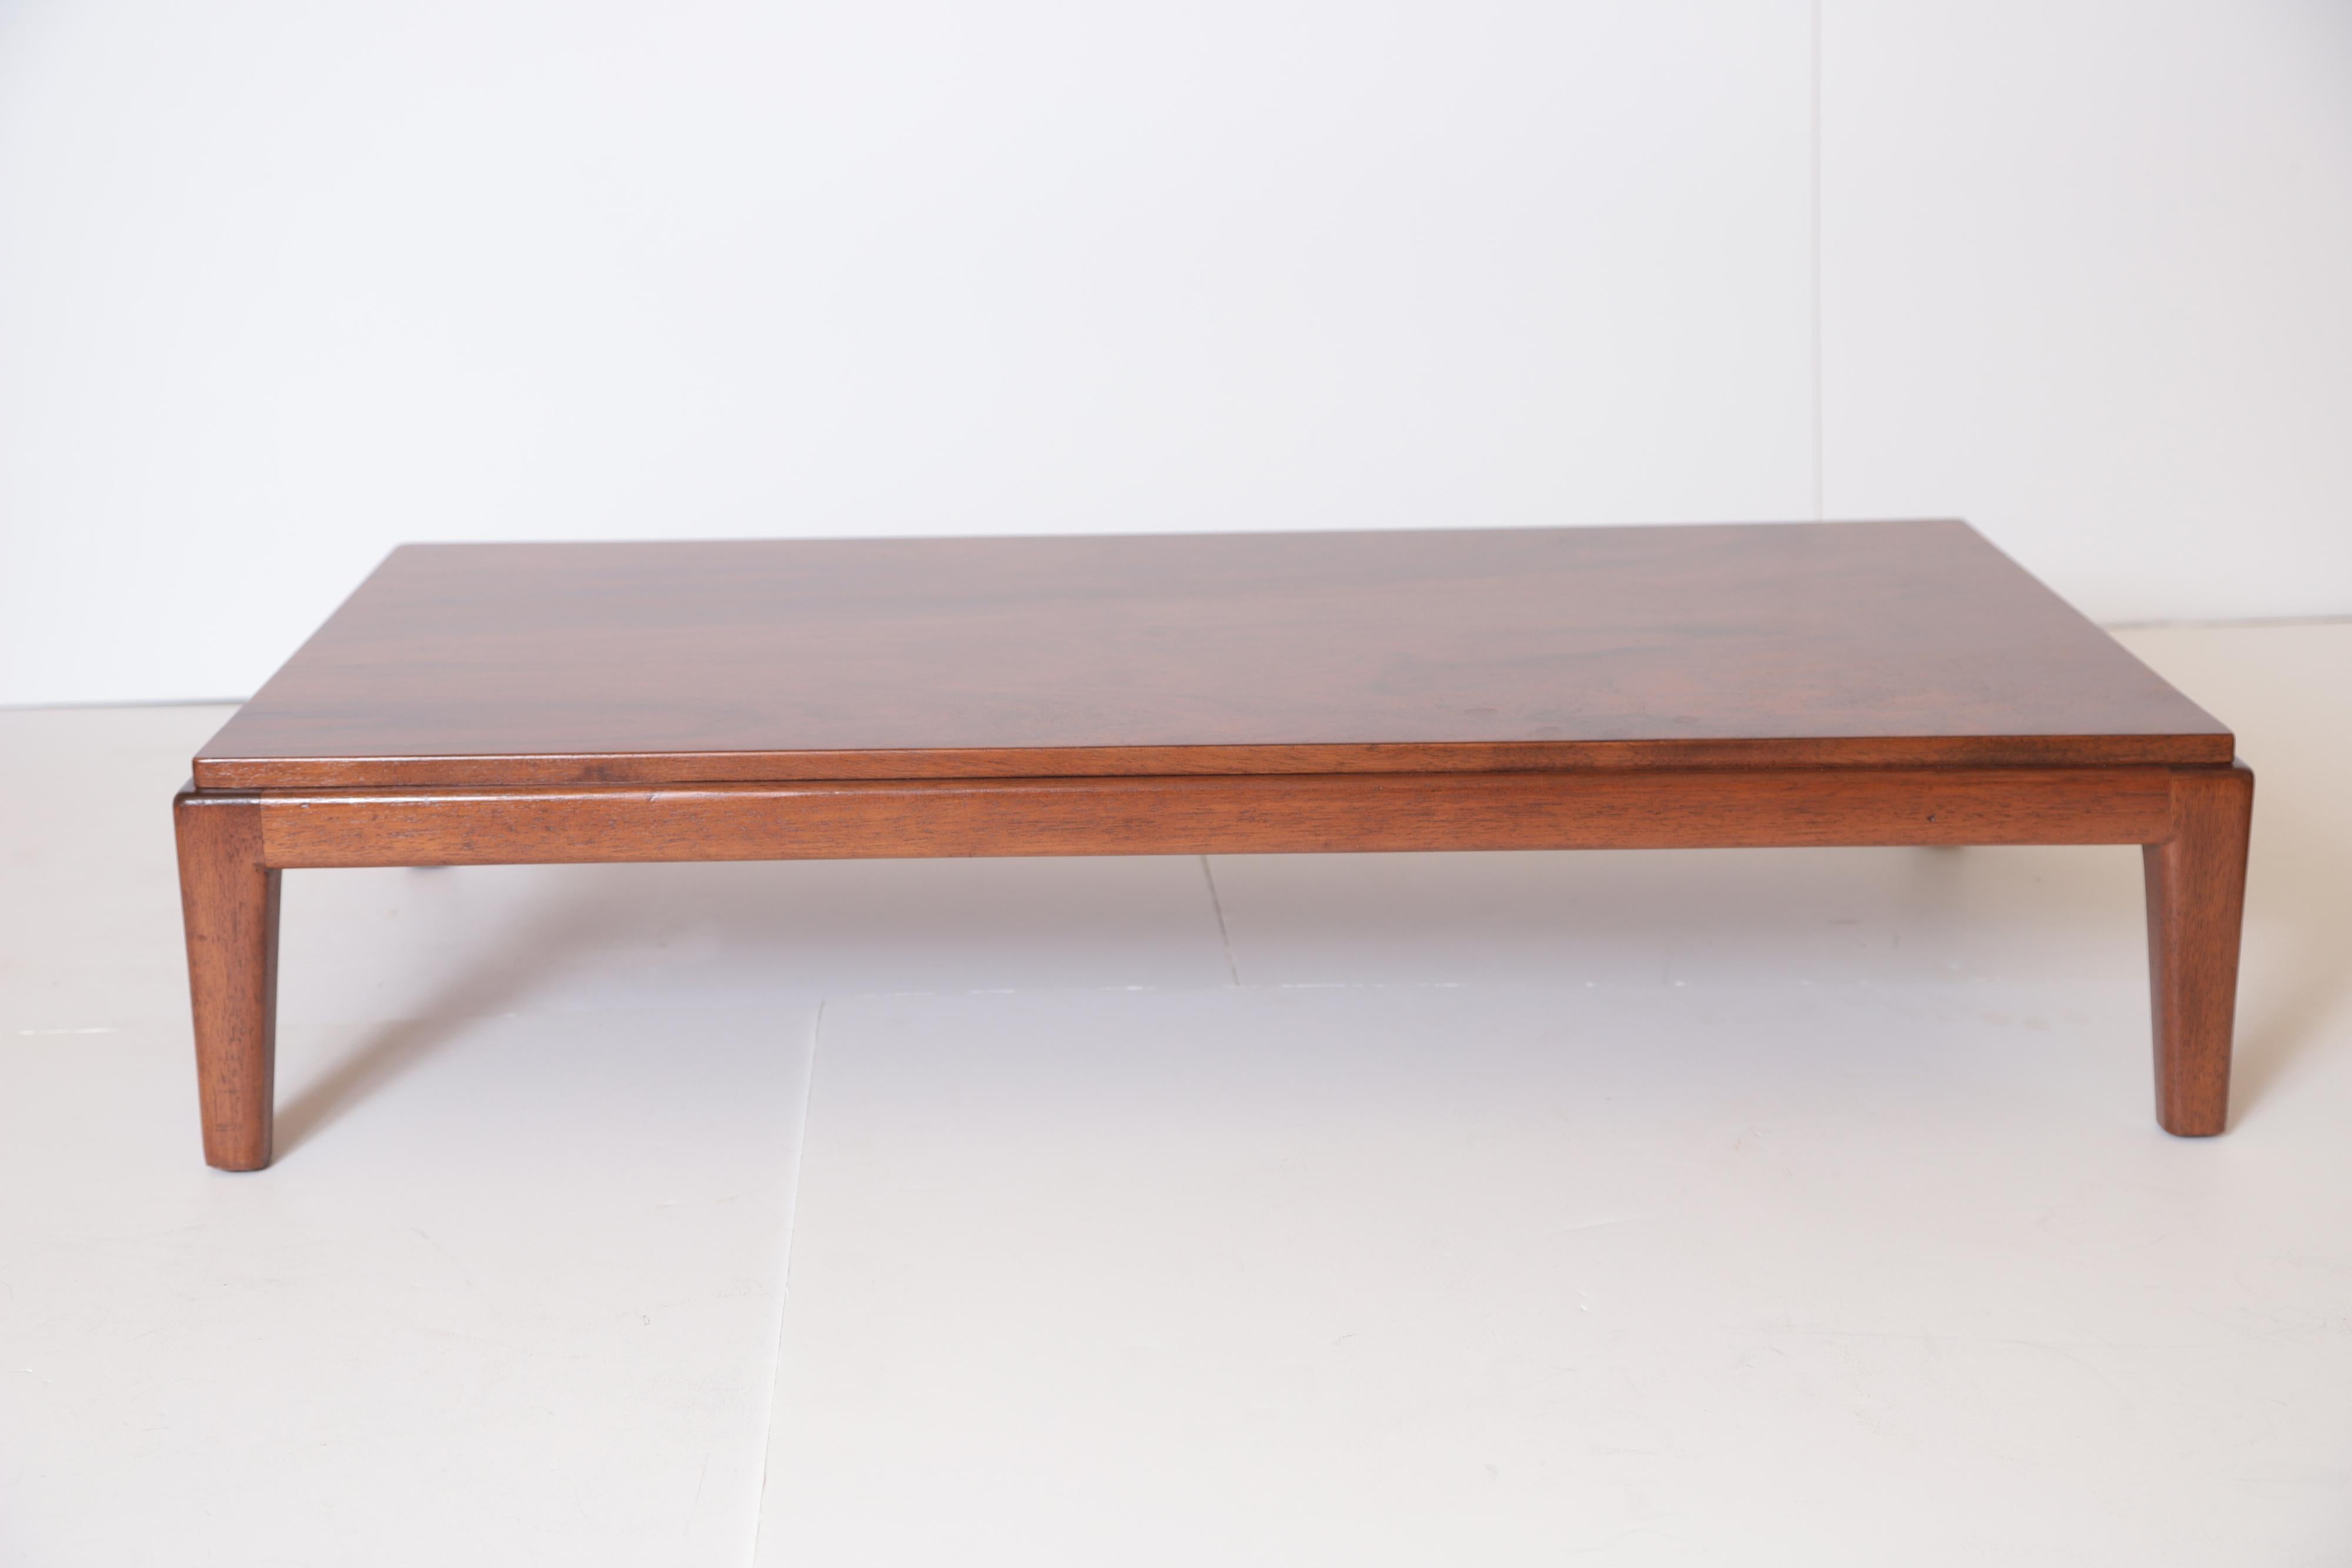 Art Deco Midcentury Low Coffee or Occasional Table by Schmieg & Kotzian For Sale 4